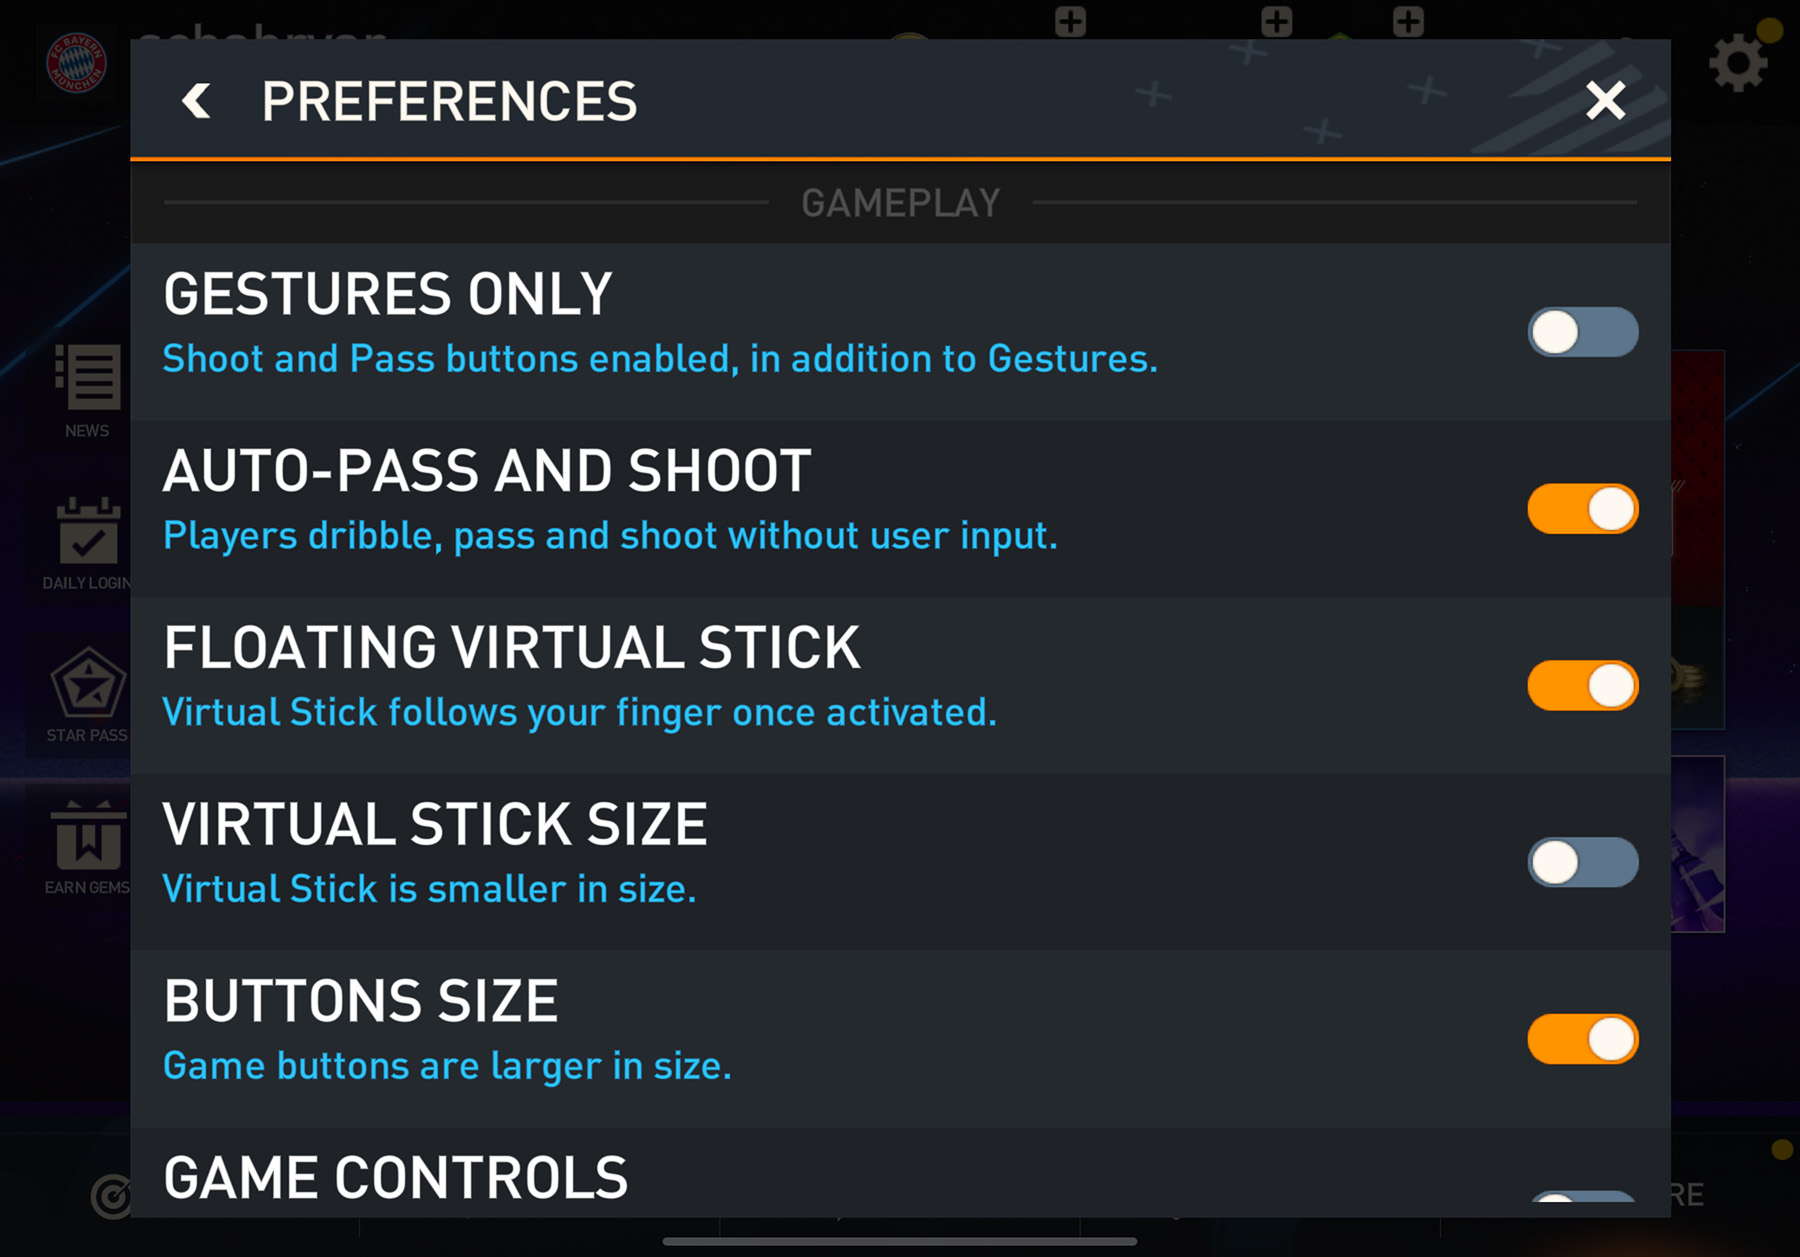 FIFA Mobile - Gameplay Controls Guide - Set Pieces